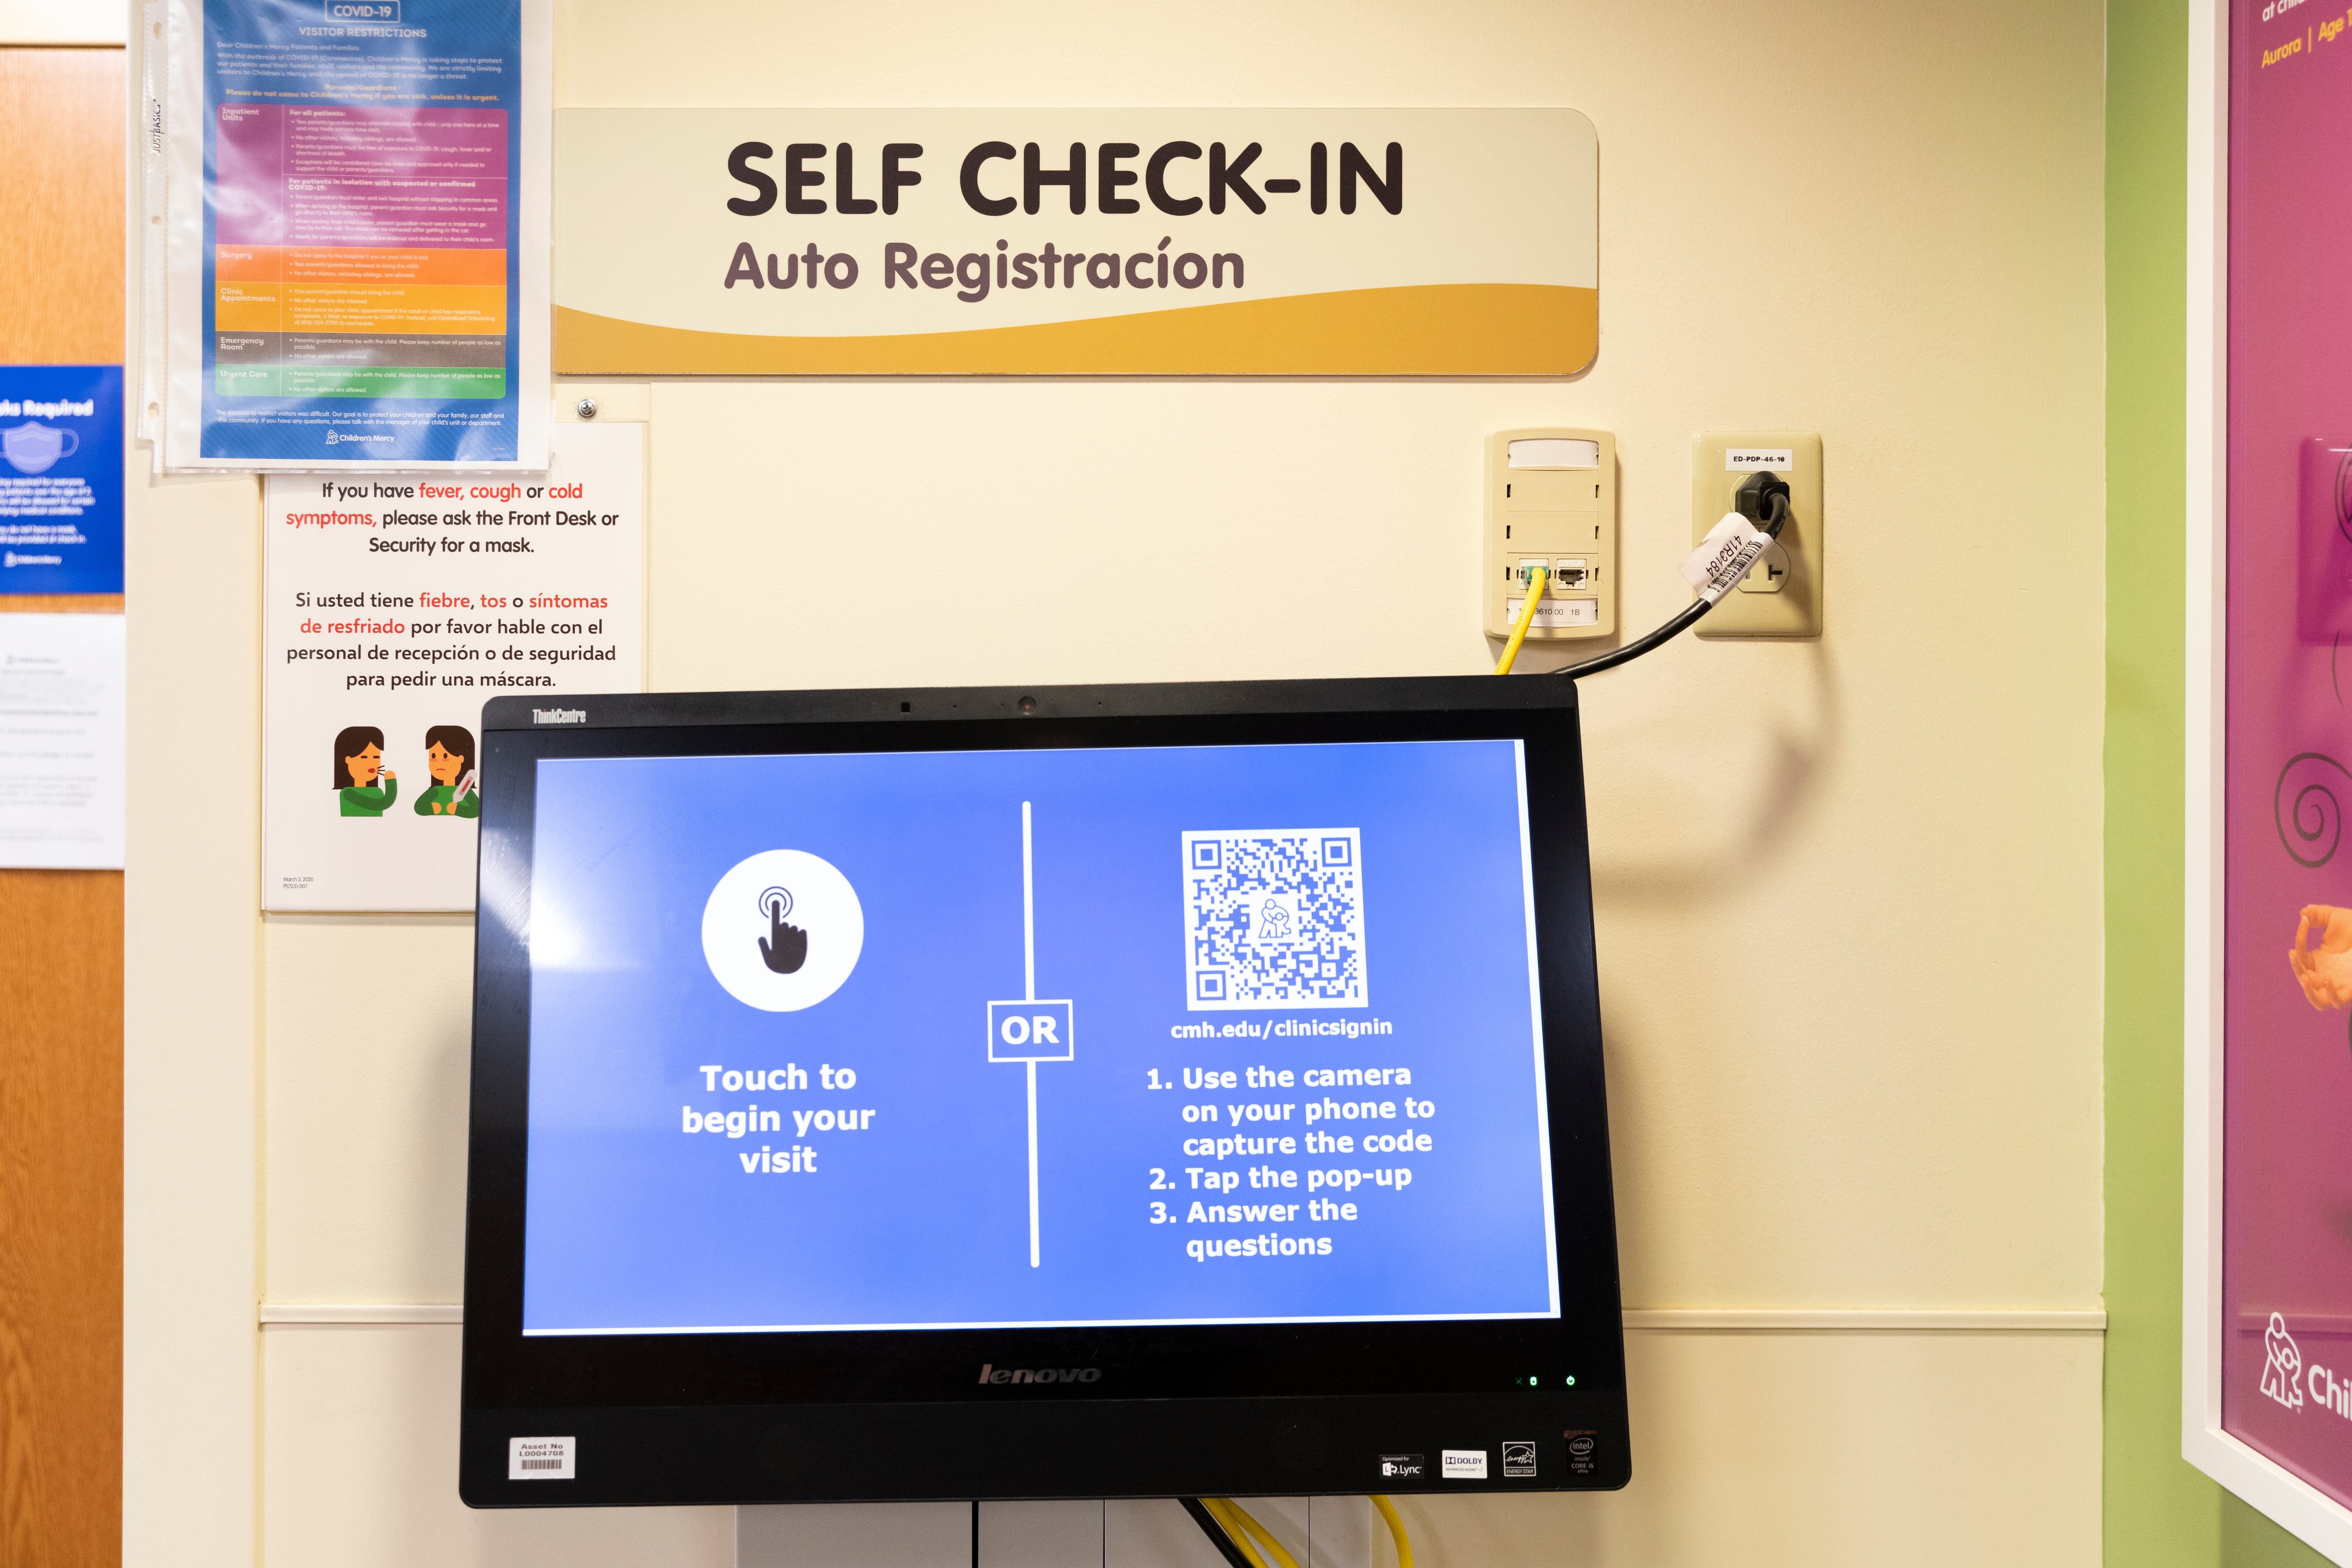 A self check-in station allows families to check in via touchscreen.